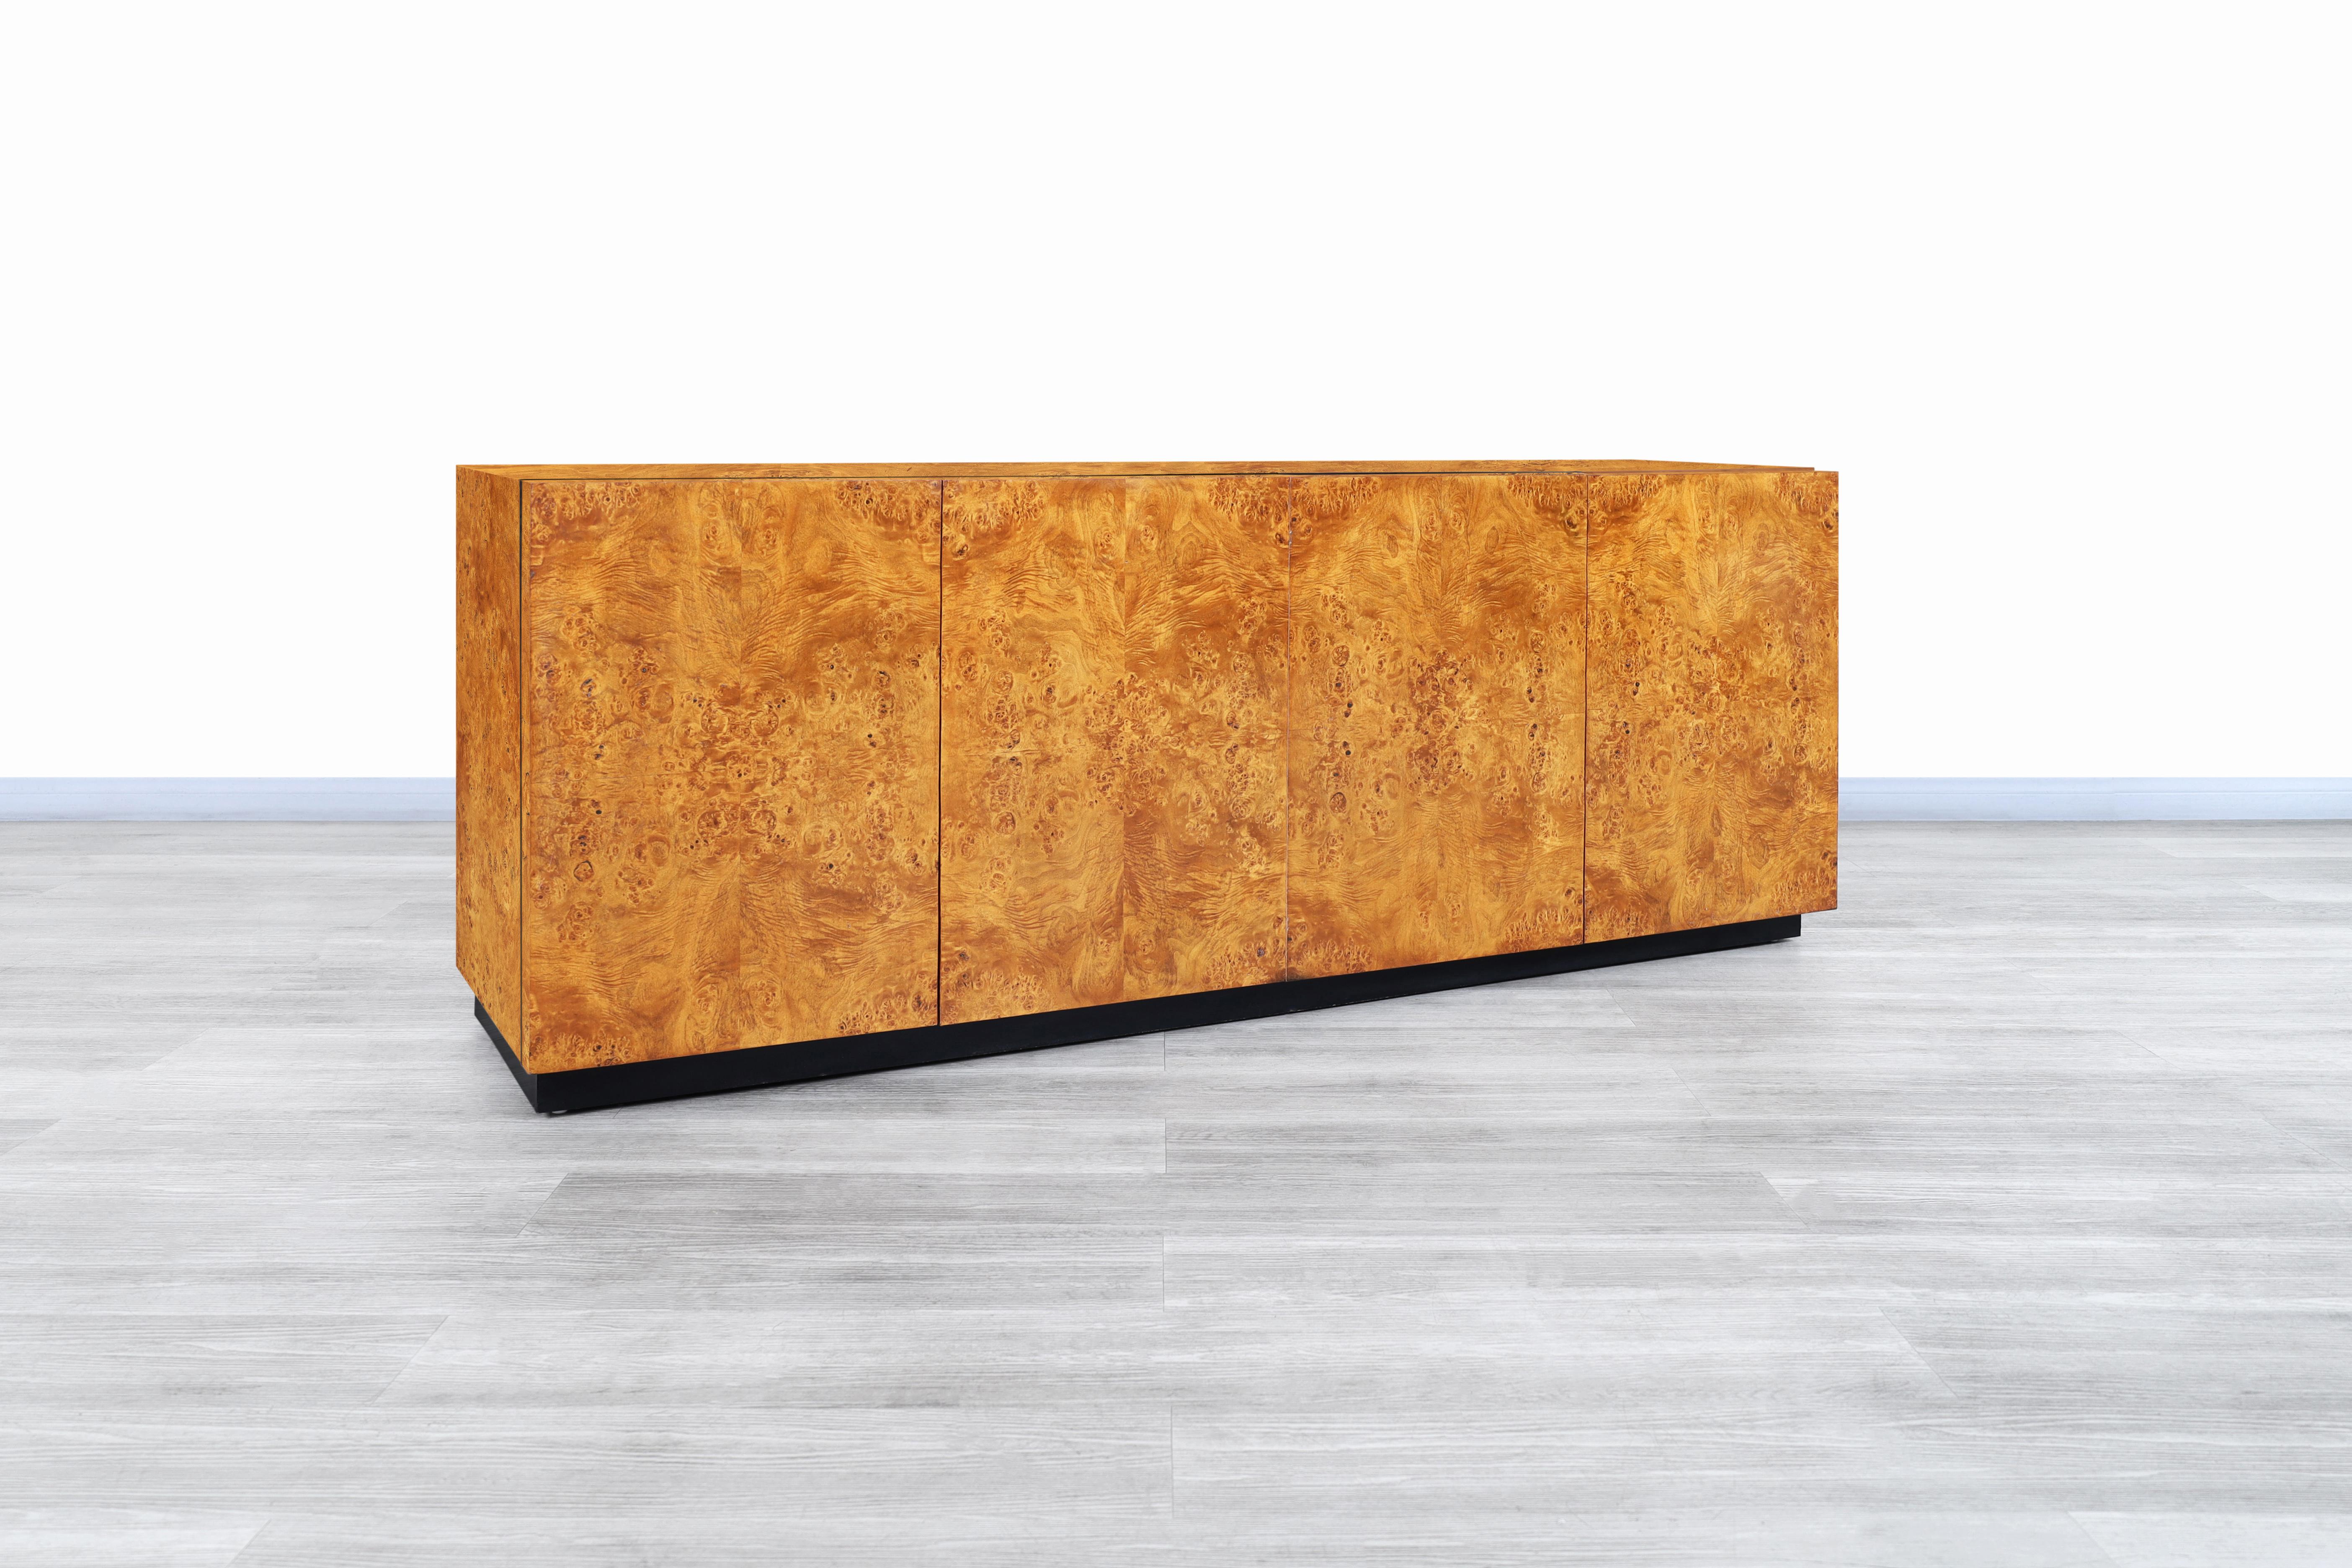 Wonderful vintage burl wood credenza designed by Arthur Umanoff for Dillingham in the United States, circa 1970s. This credenza has a minimalist but highly functional design and is complemented by the suitable materials used for its construction.